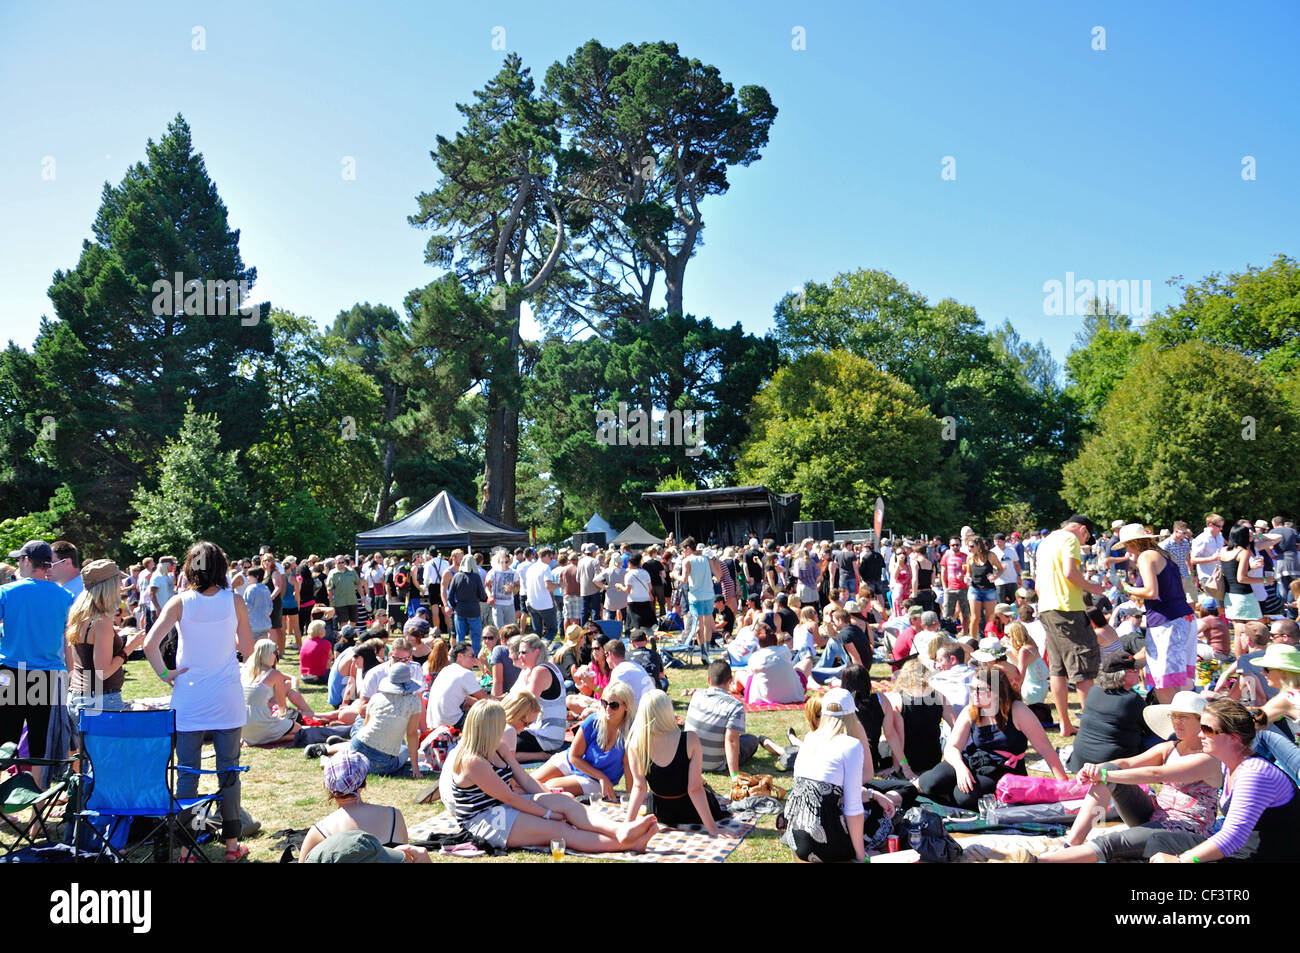 The Great Kiwi Beer Festival, Hagley Park, Christchurch, Canterbury District, New Zealand Stock Photo